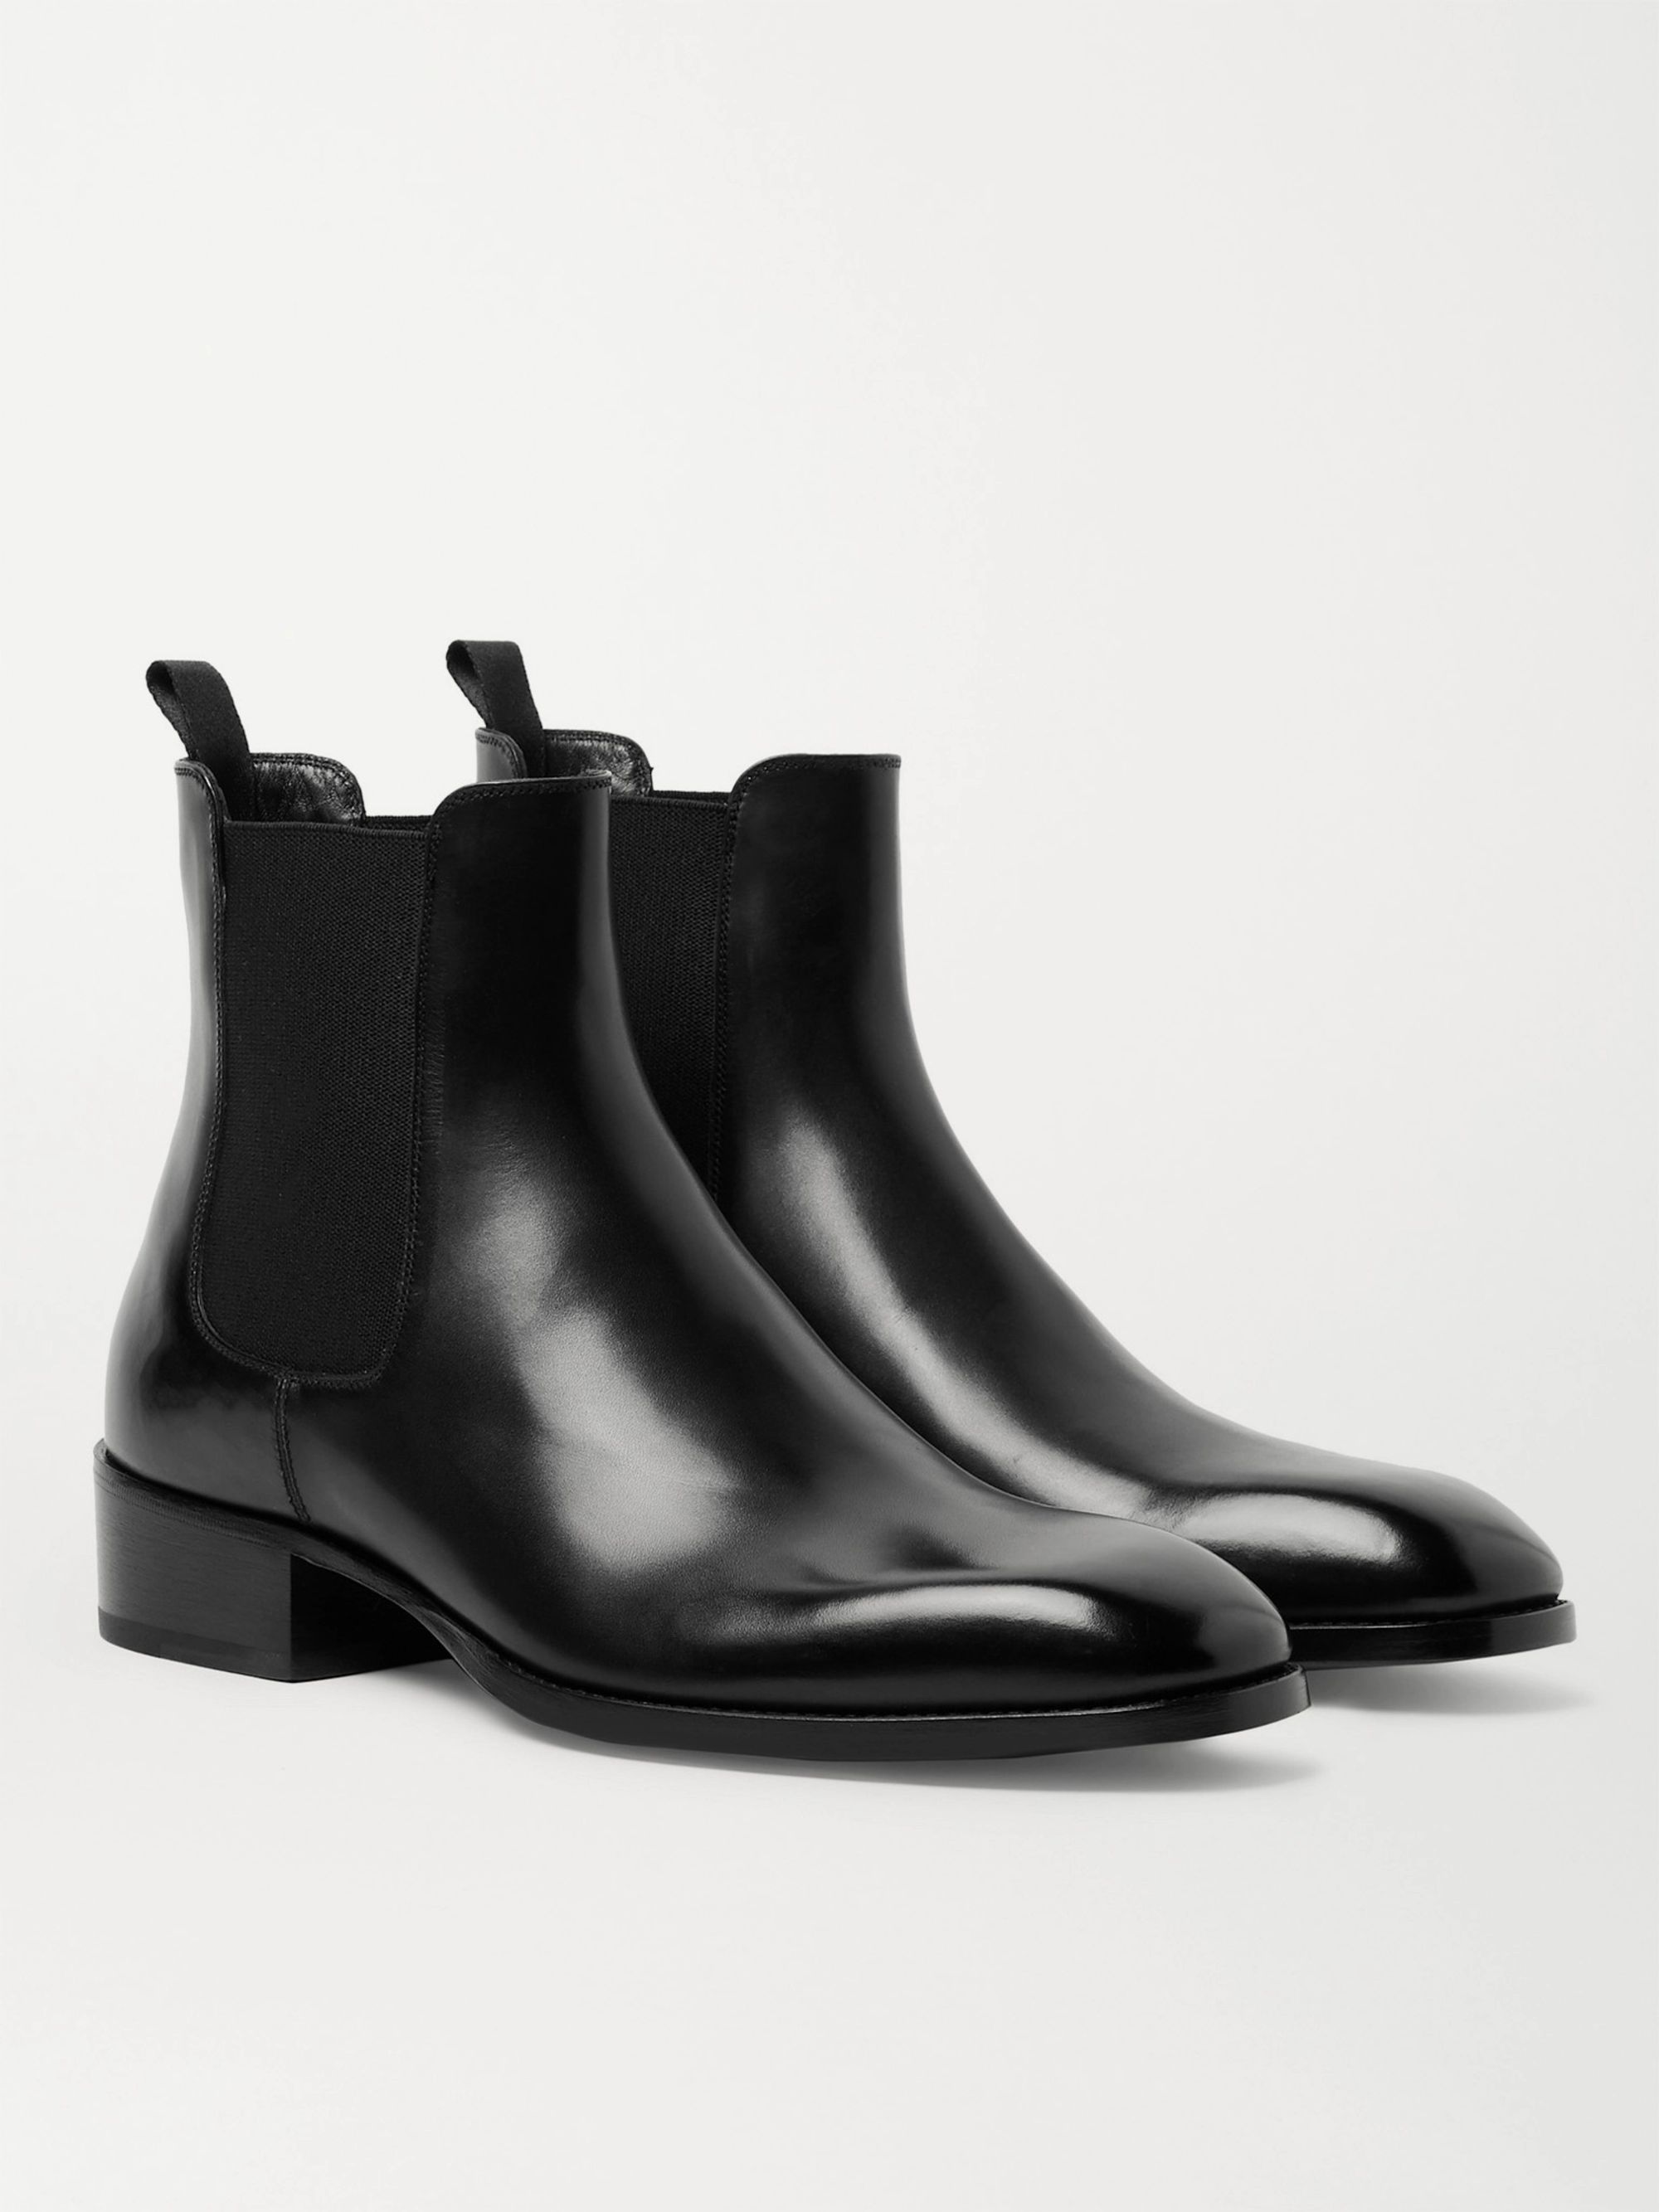 tom ford python chelsea boots